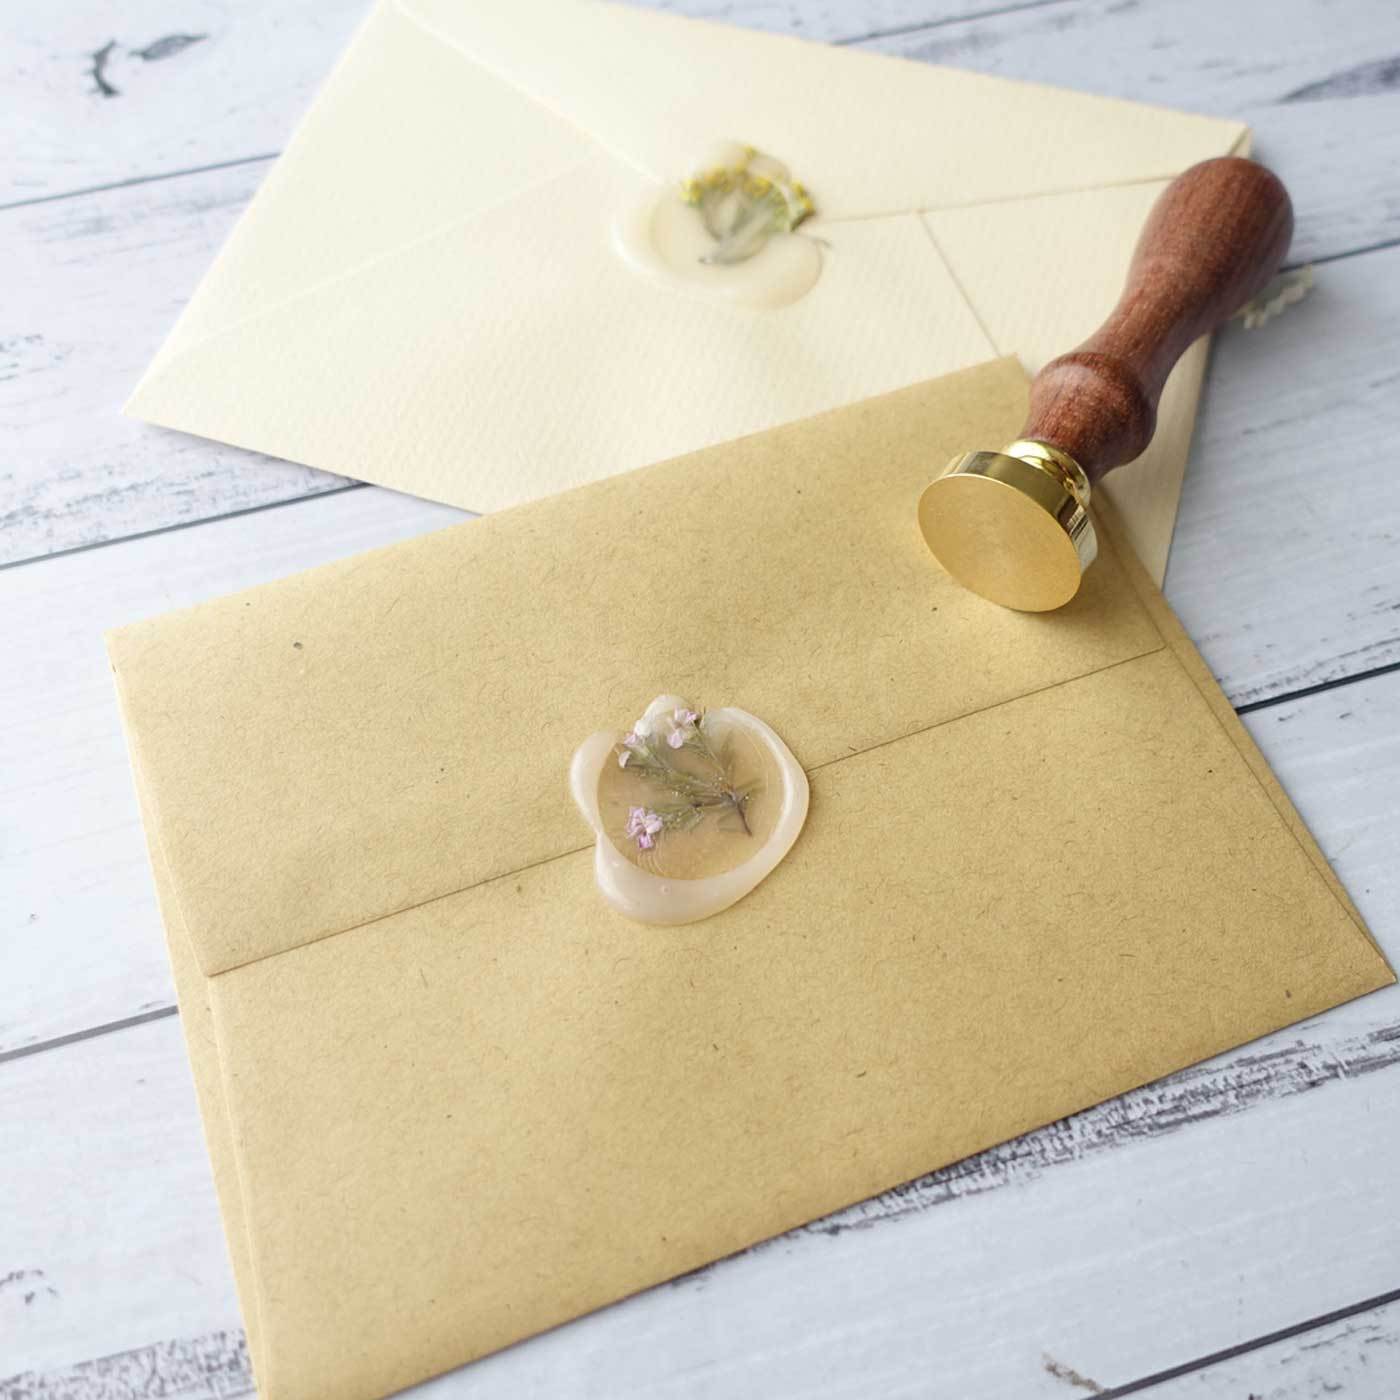 Semi transparent wax seal with flowers on envelope with blank wax seal stamp